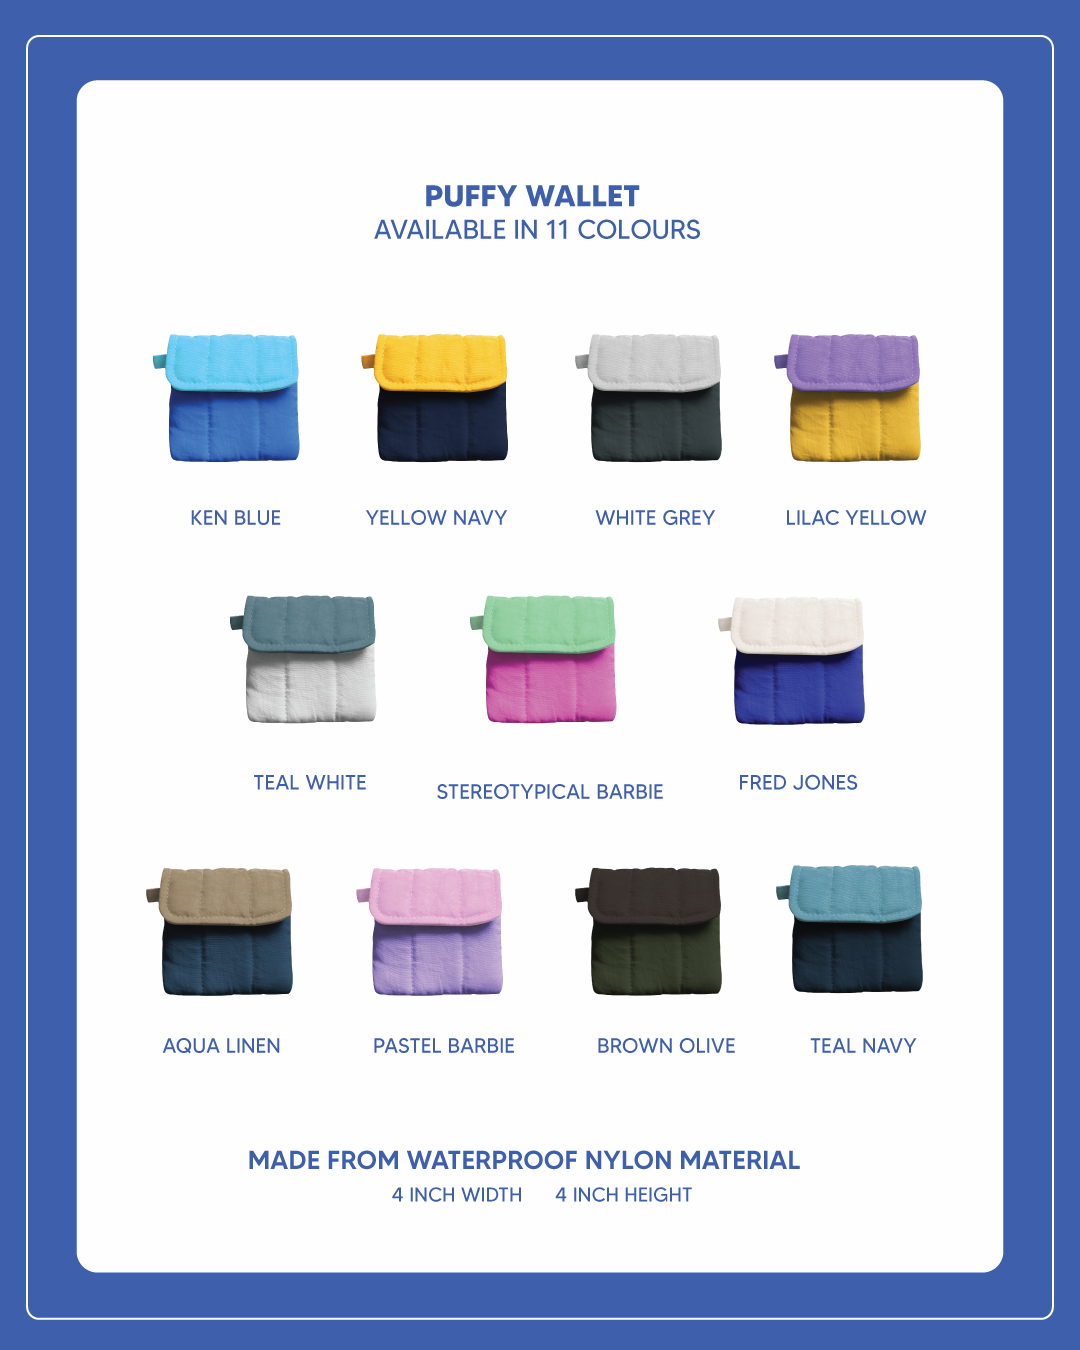 Puffy Wallet - Yellow Lilac